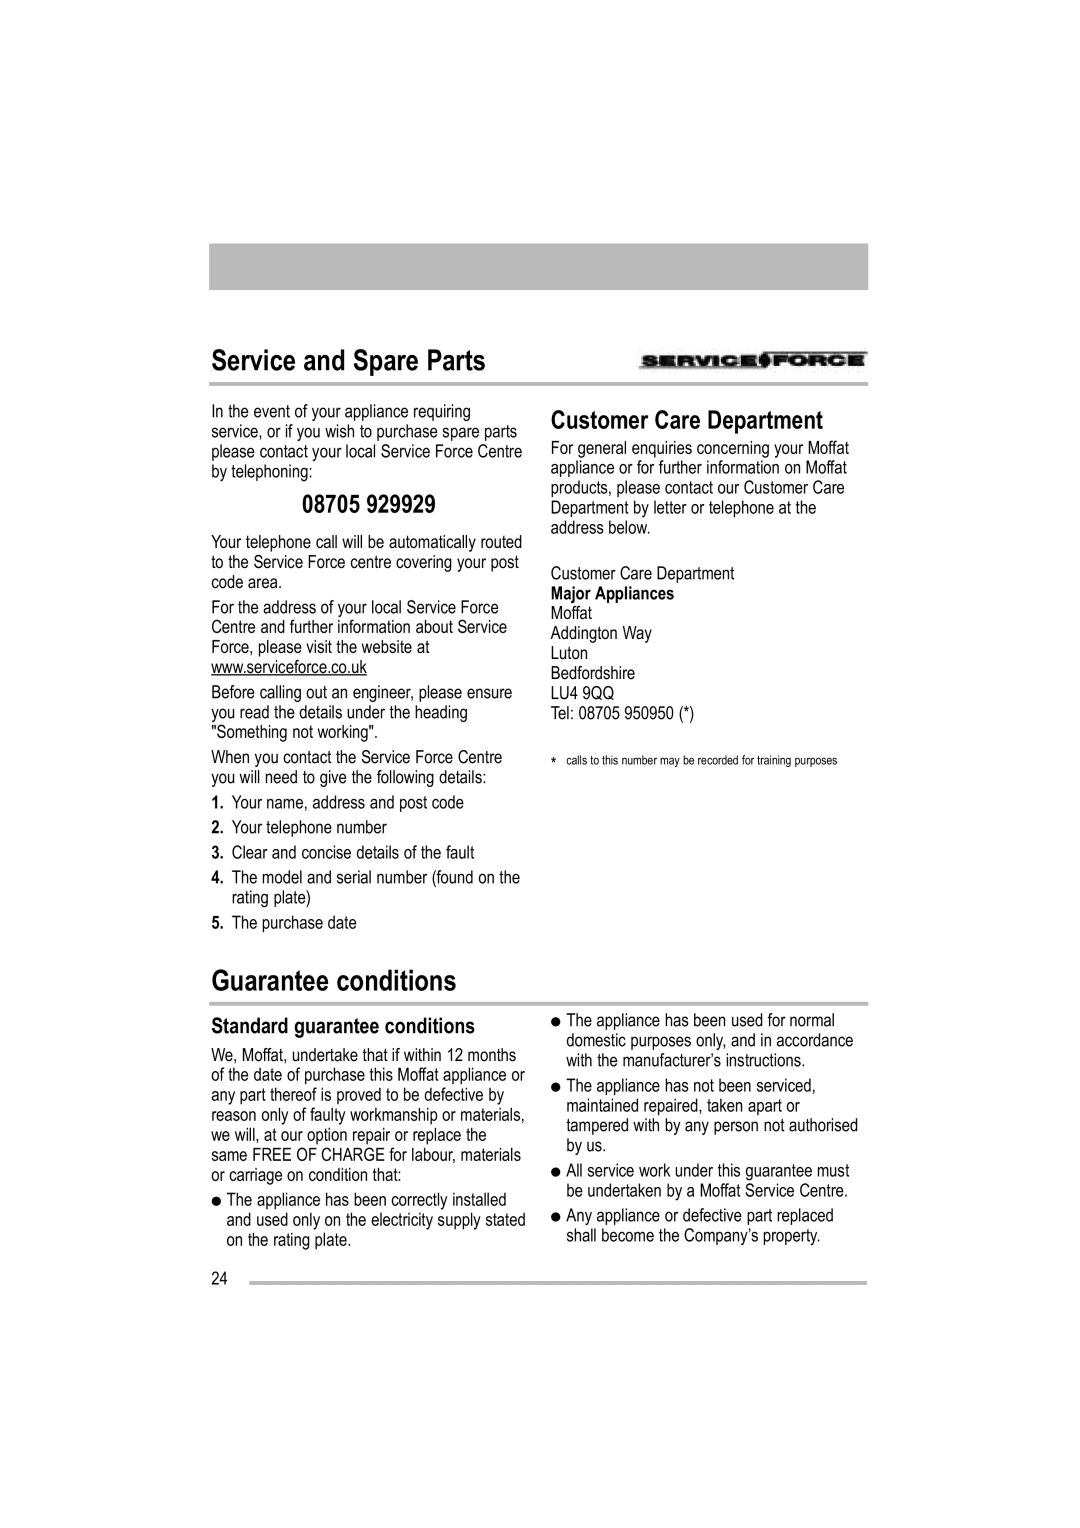 Moffat MDW 542 user manual Service and Spare Parts, Guarantee conditions, 08705, Customer Care Department, Major Appliances 